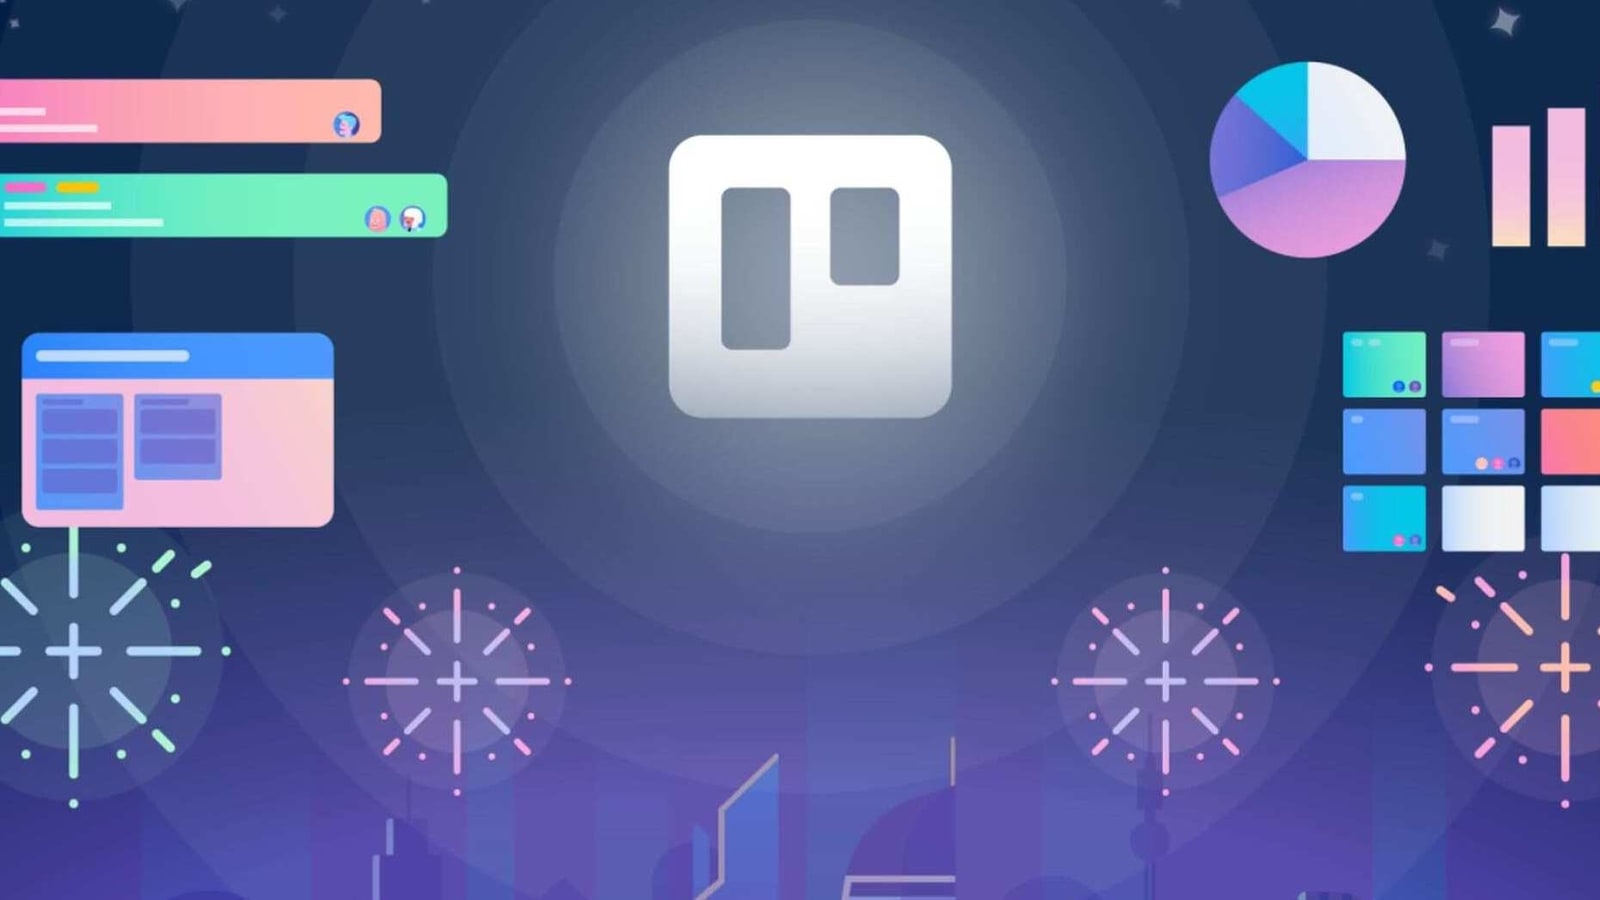 Trello Backgrounds 7 awesome free illustrations to change up your Trello  Boards  Mixkit